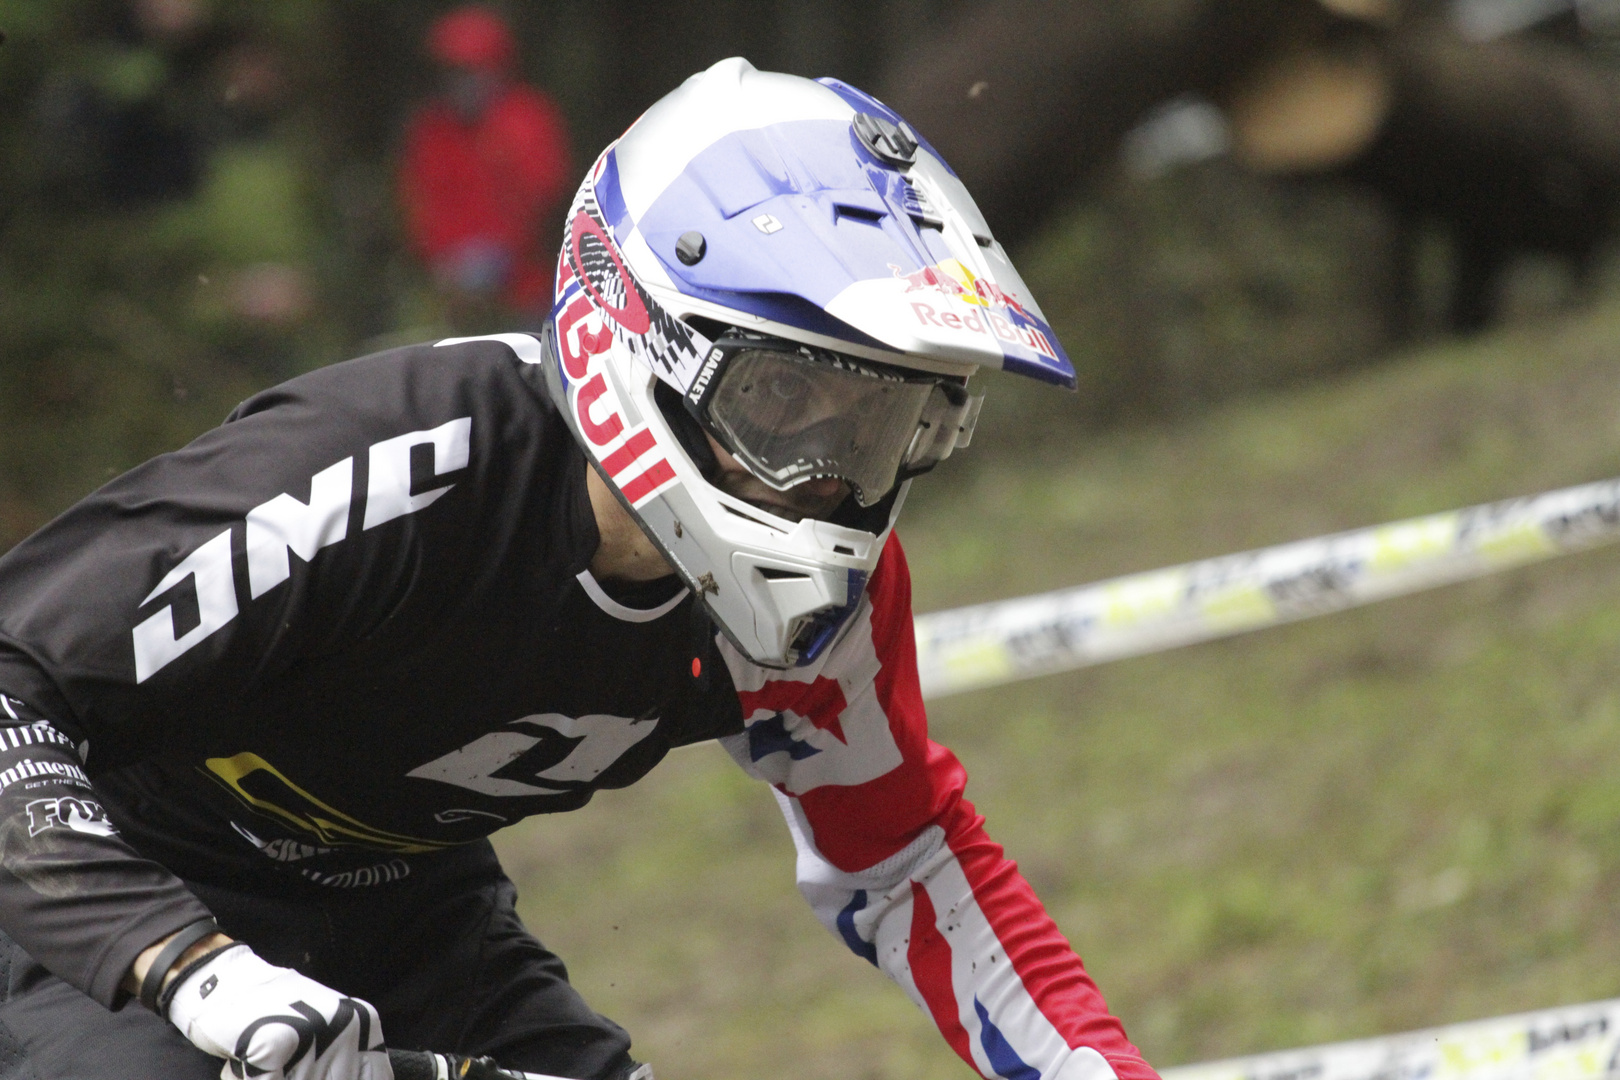 German Downhill Cup